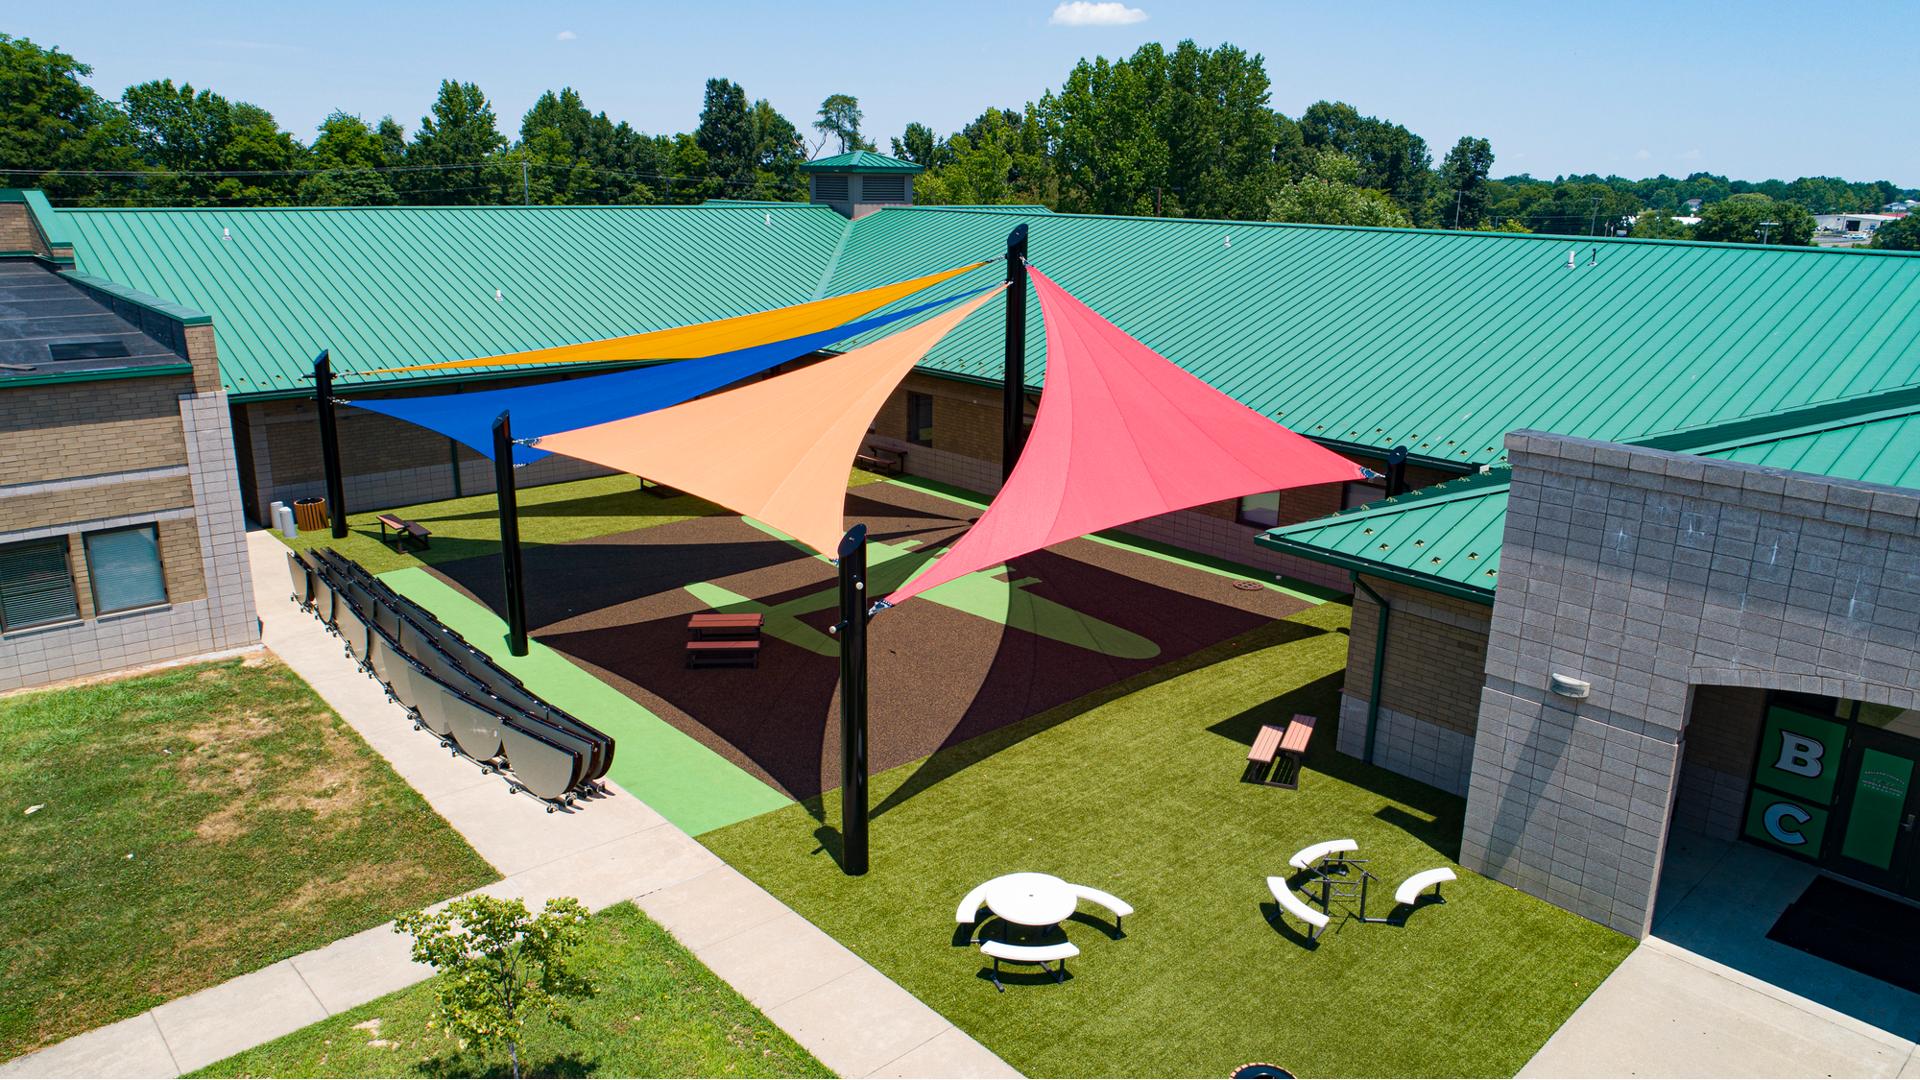 A large open area nestled into a building with an airplane silhouette designed into the turf. Four large triangular shade sales connect to four different posts over the open turfed area. A line of folded circular tables line a side walk next to the turfed area.